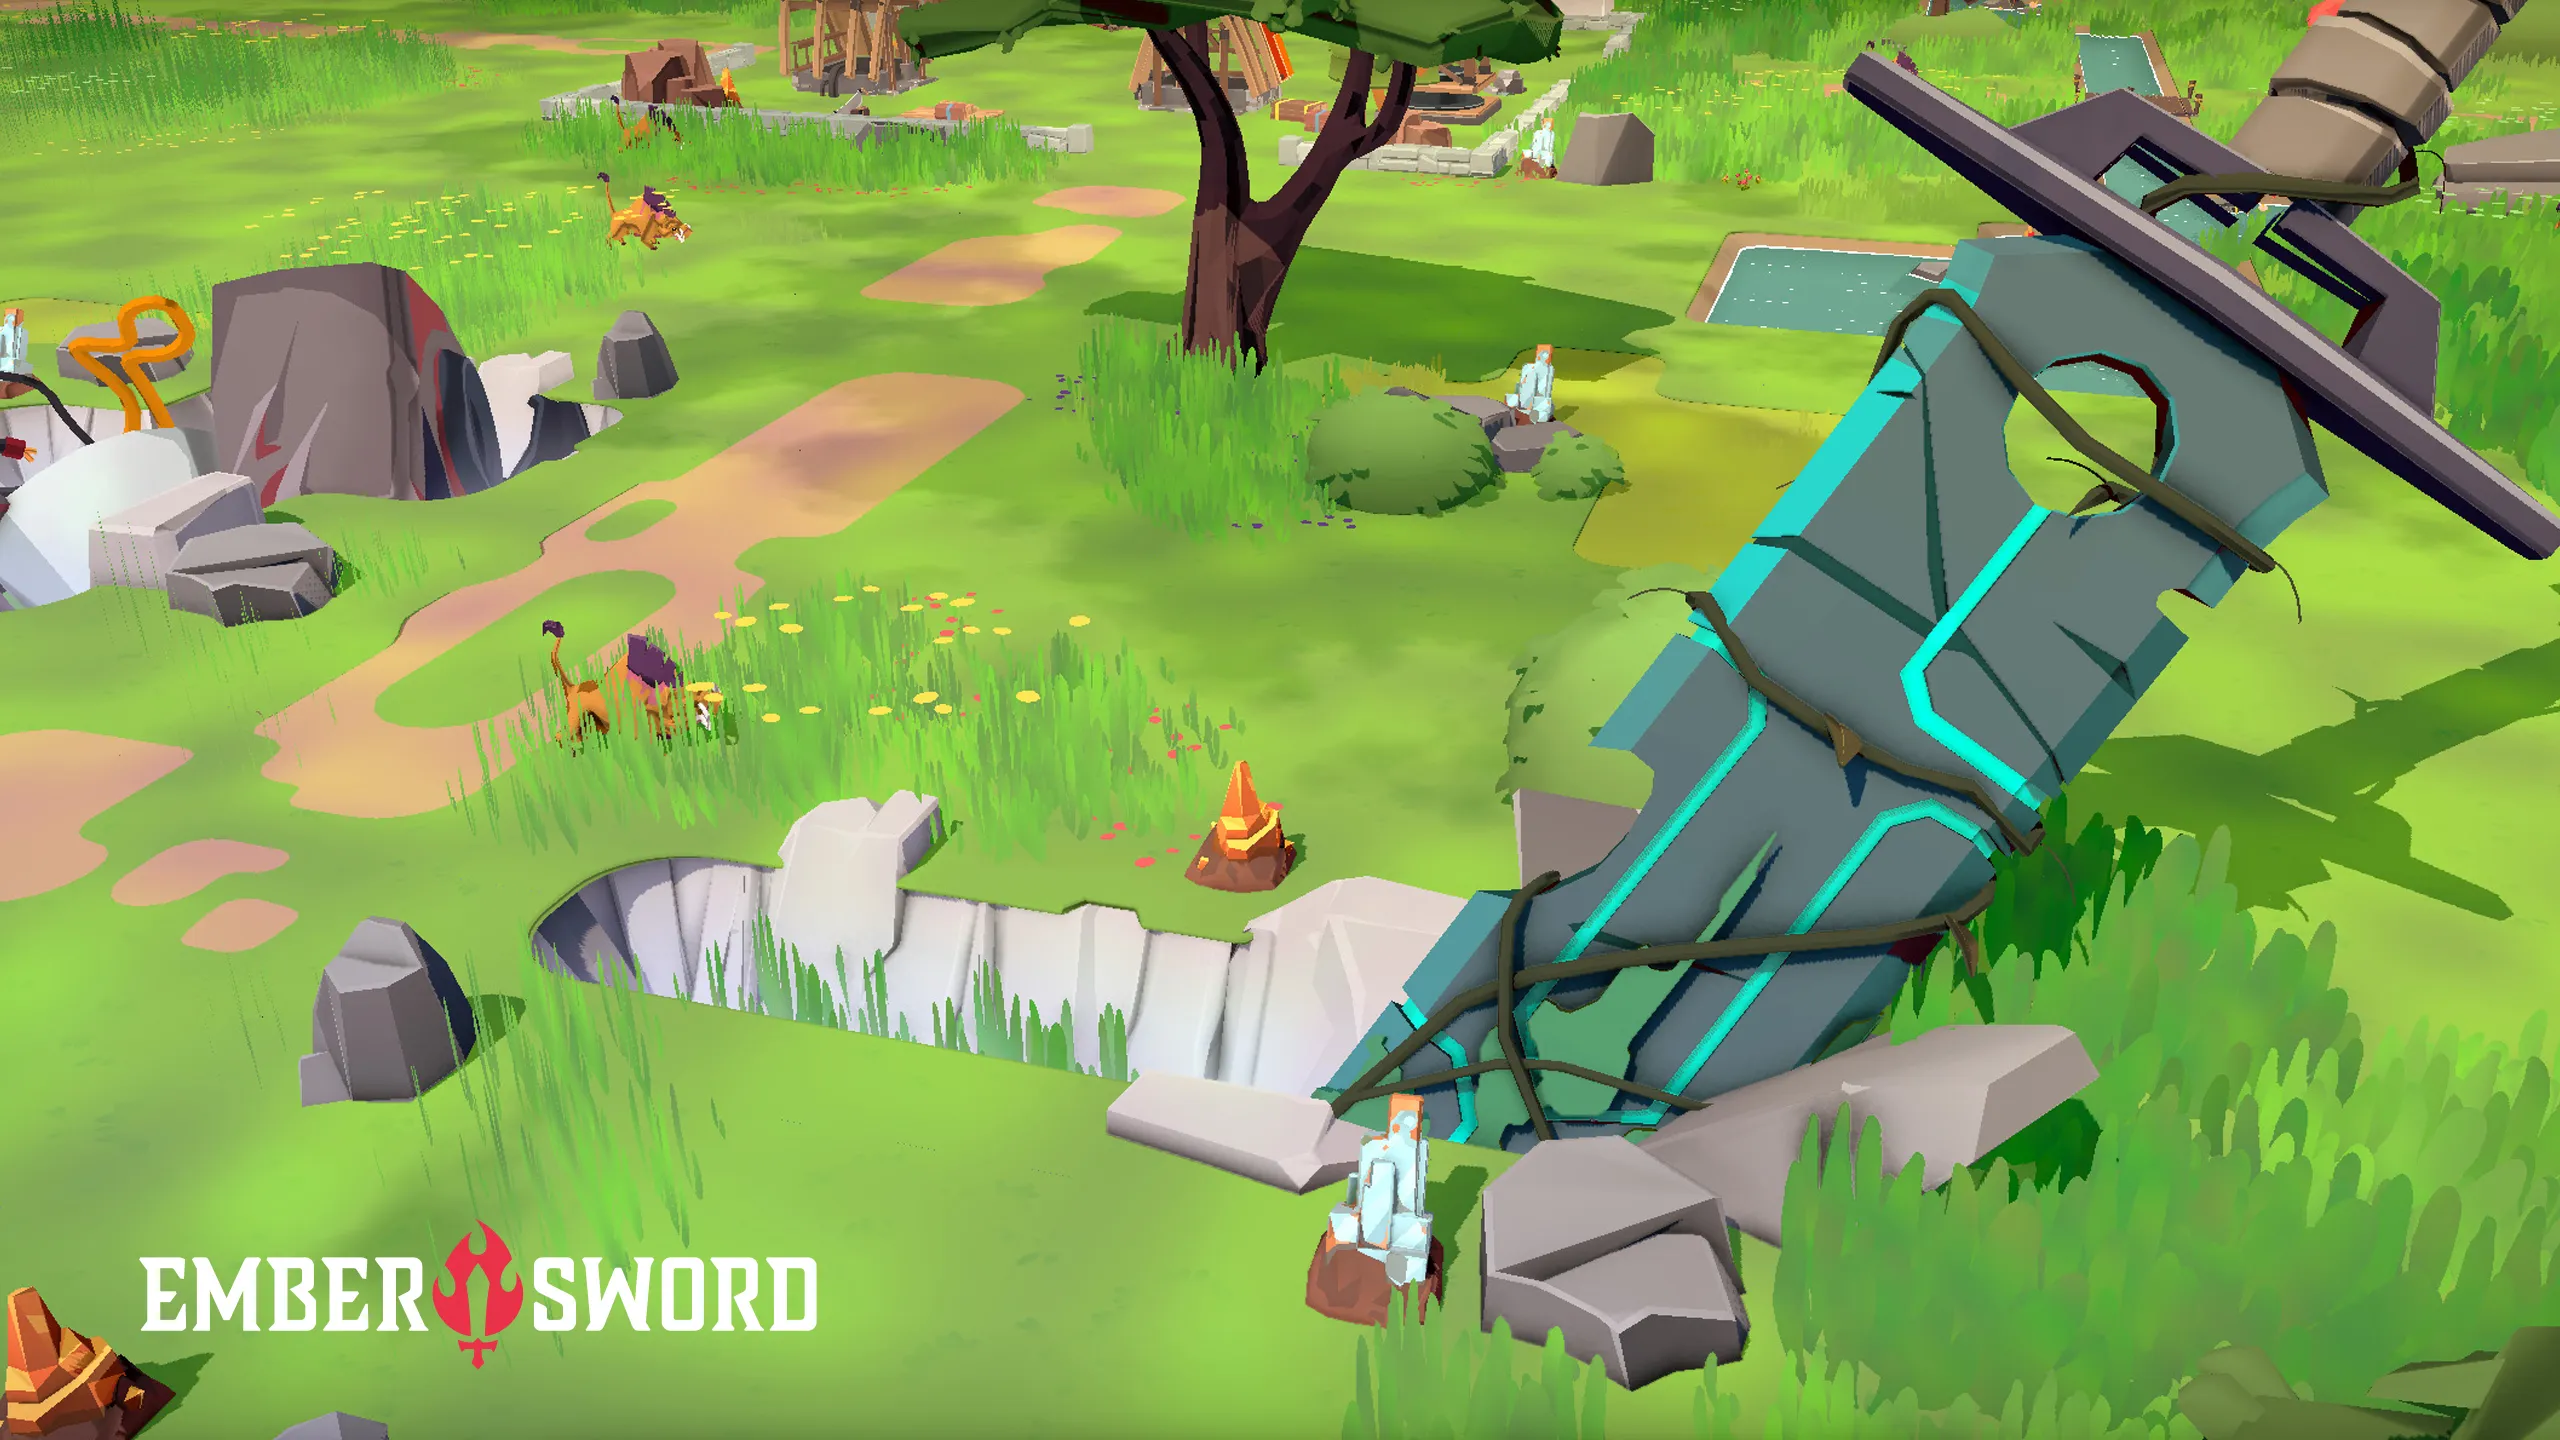 The Colossal Sword, believed to be owned by giant robots, in Ember Sword. Here, players embark on quests, battle monsters, and explore the world of Thanabus.